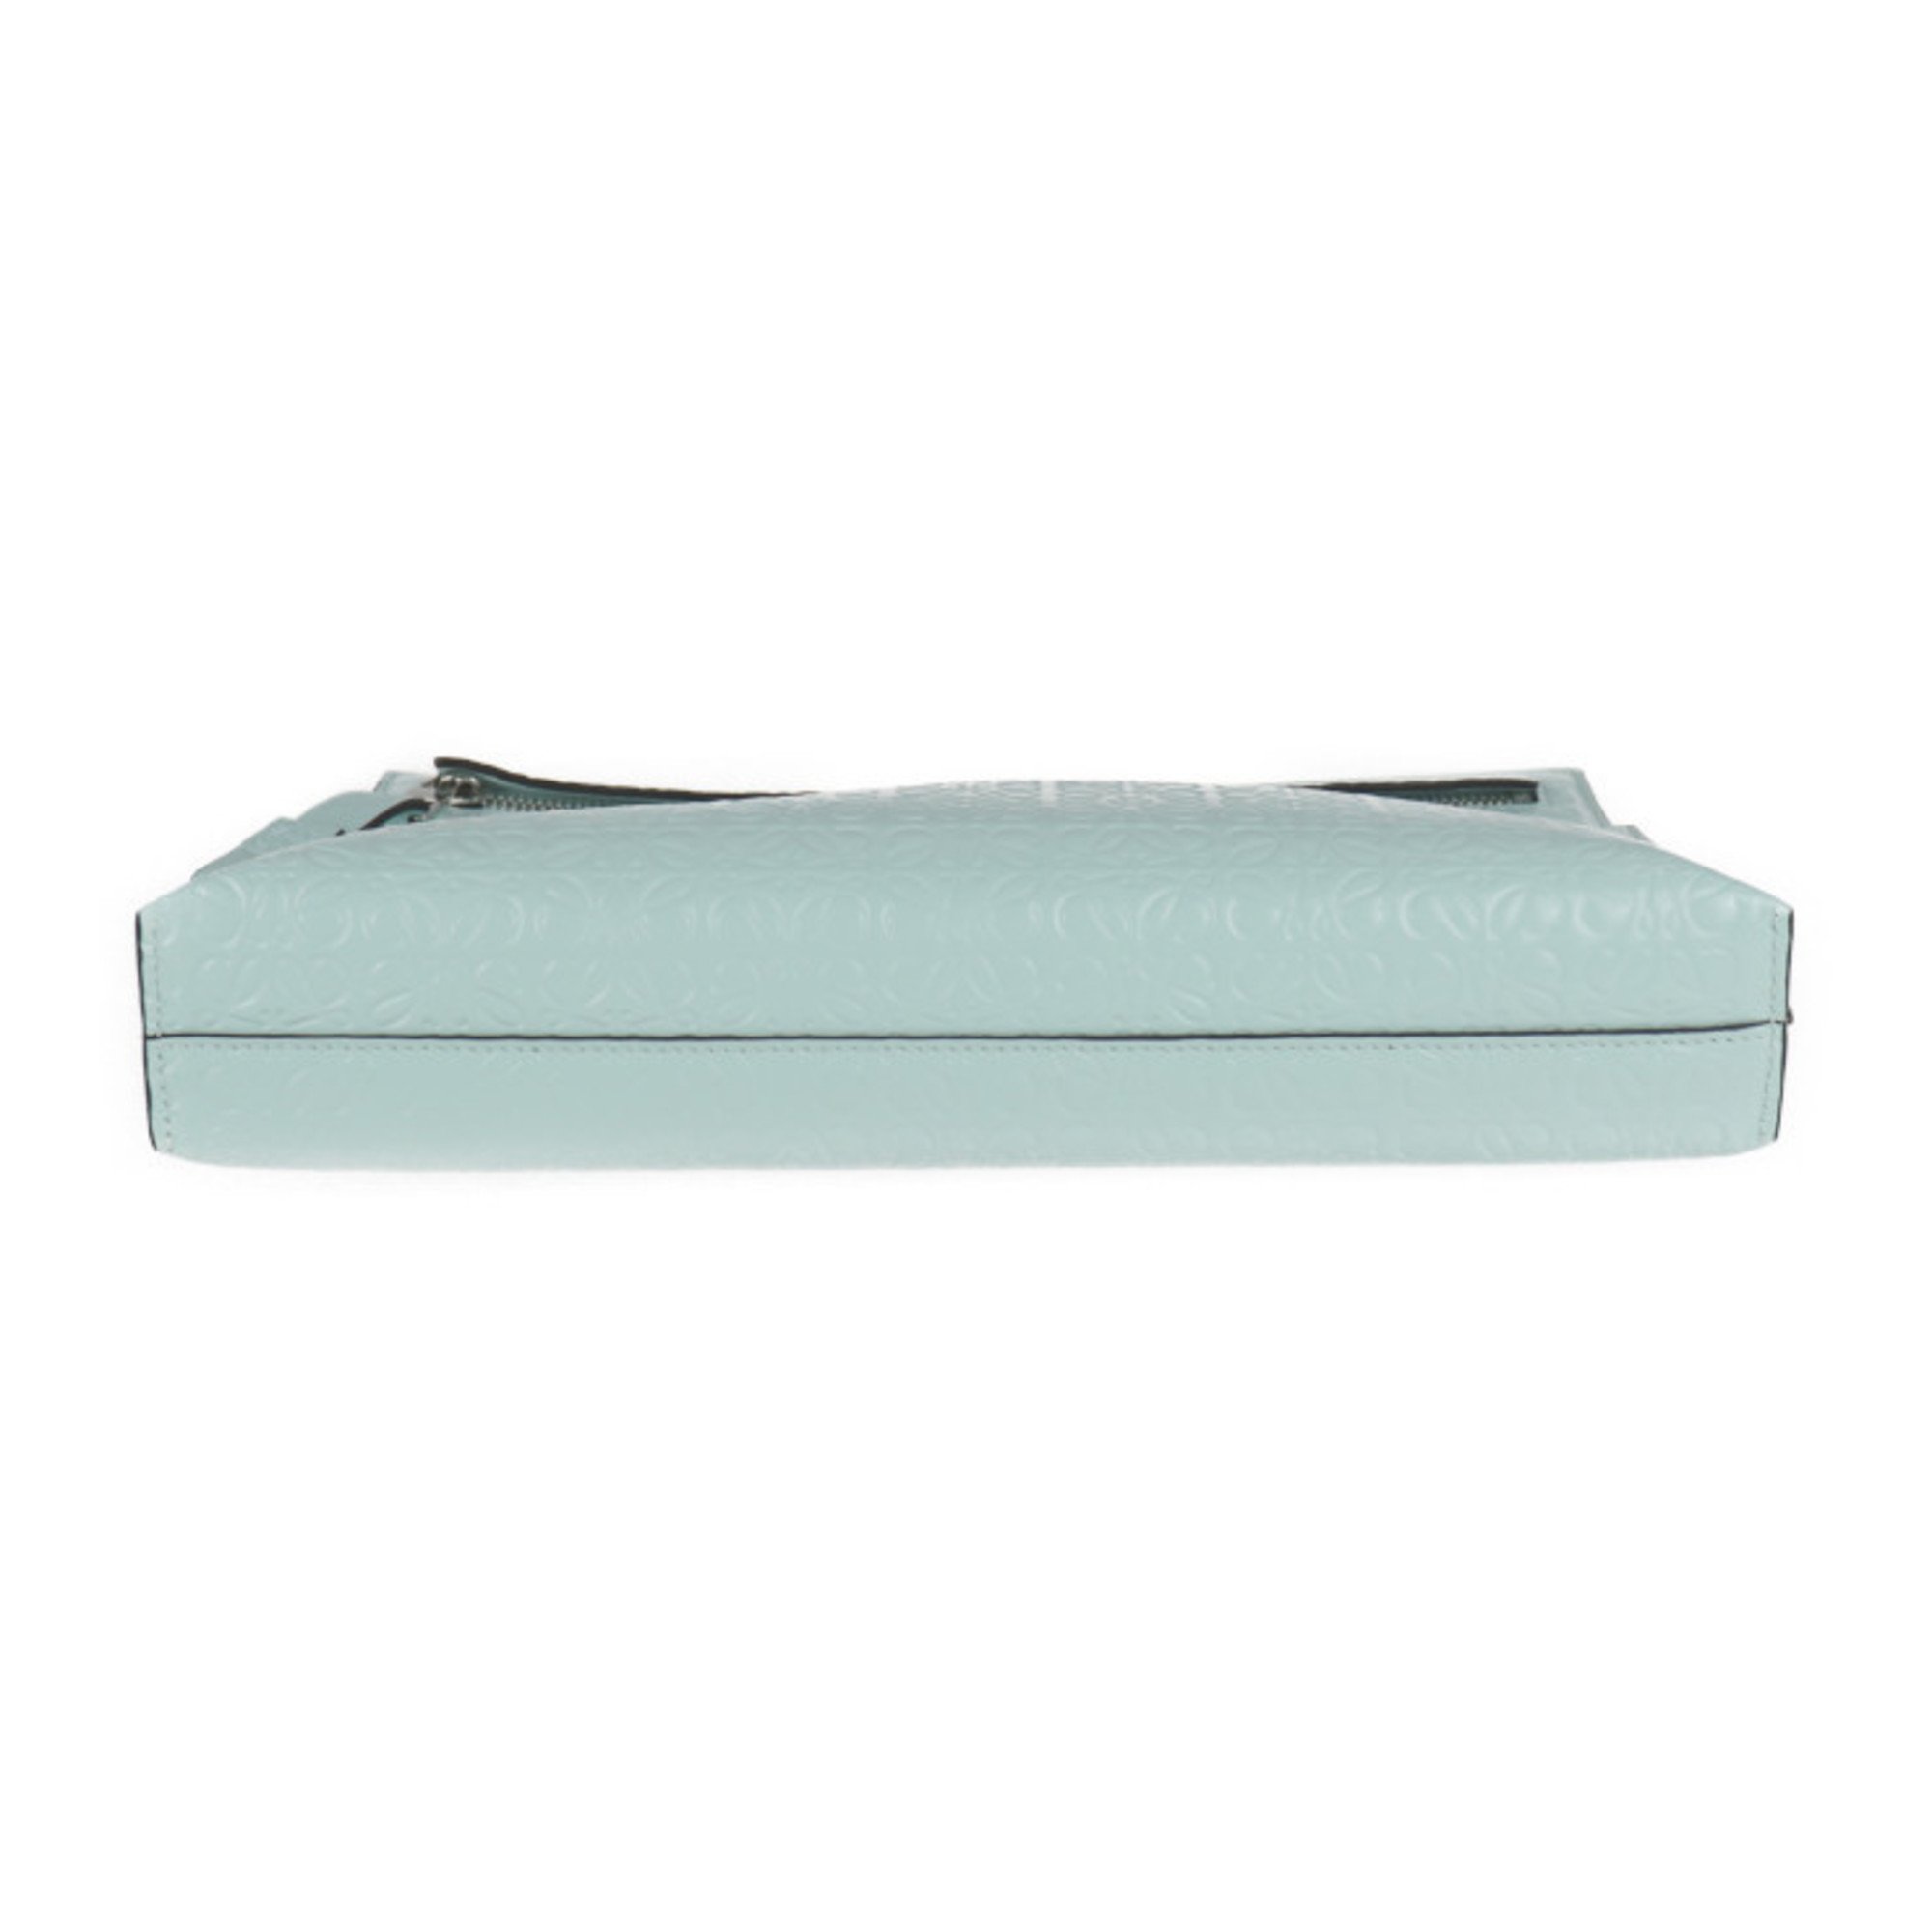 LOEWE Loewe T Pouch Repeat Anagram Clutch Bag 109.10GW05 Patent Leather Light Blue